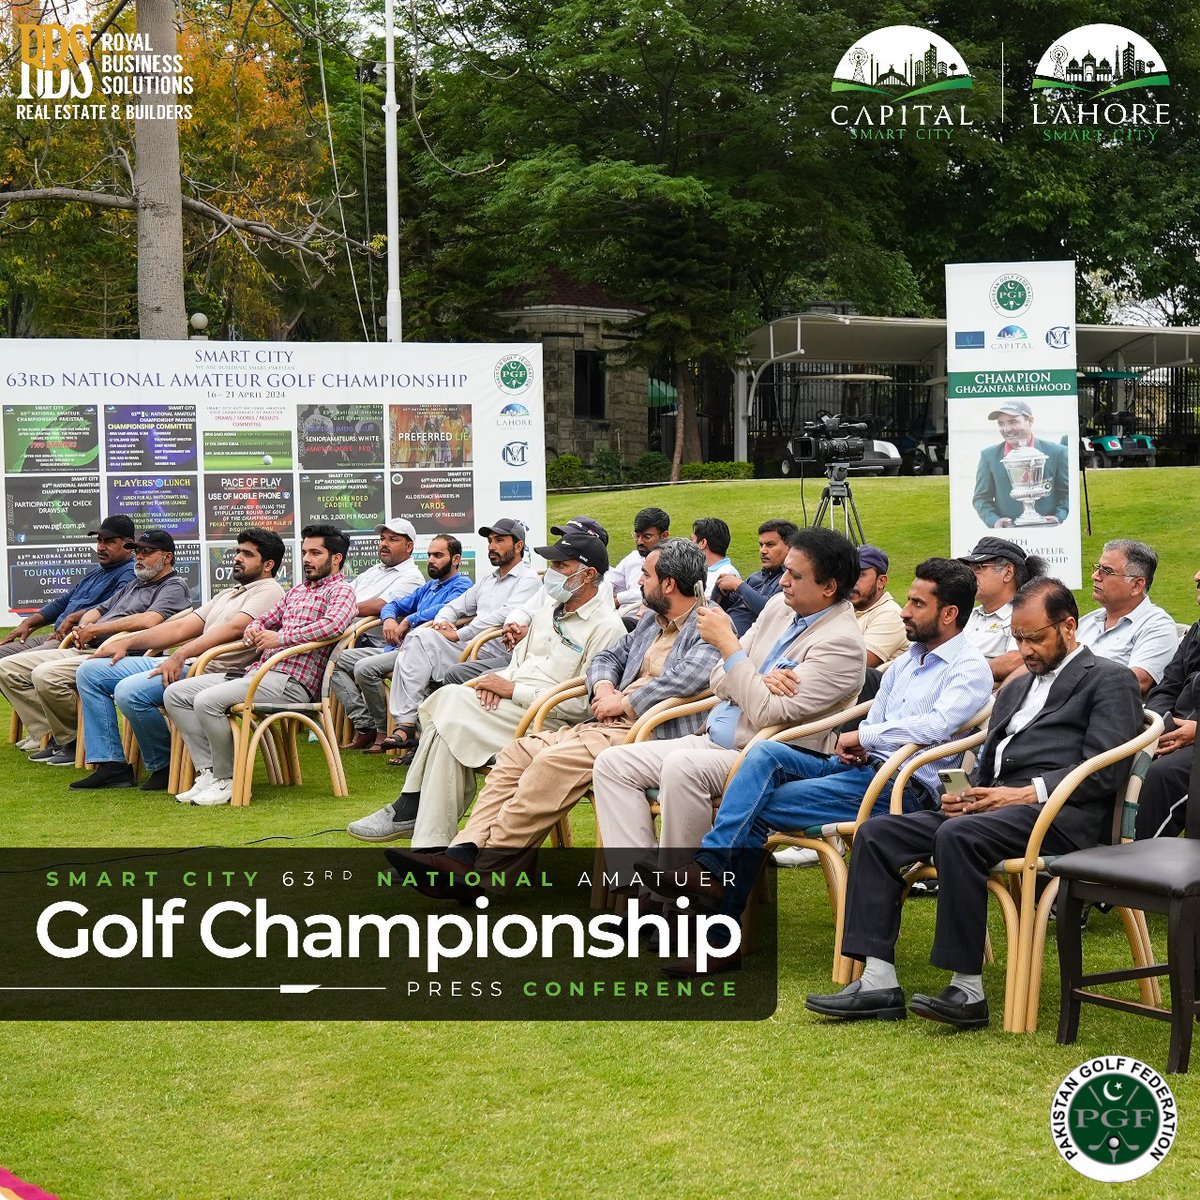 Pakistan Golf Federation (PGF), the primary governing body for golf in Pakistan, recently hosted a press conference to reveal the long-awaited Smart City 63rd National Amateur Golf Championship. Swipe through the reel for more.

#CapitalSmartCity #GolfChampionship